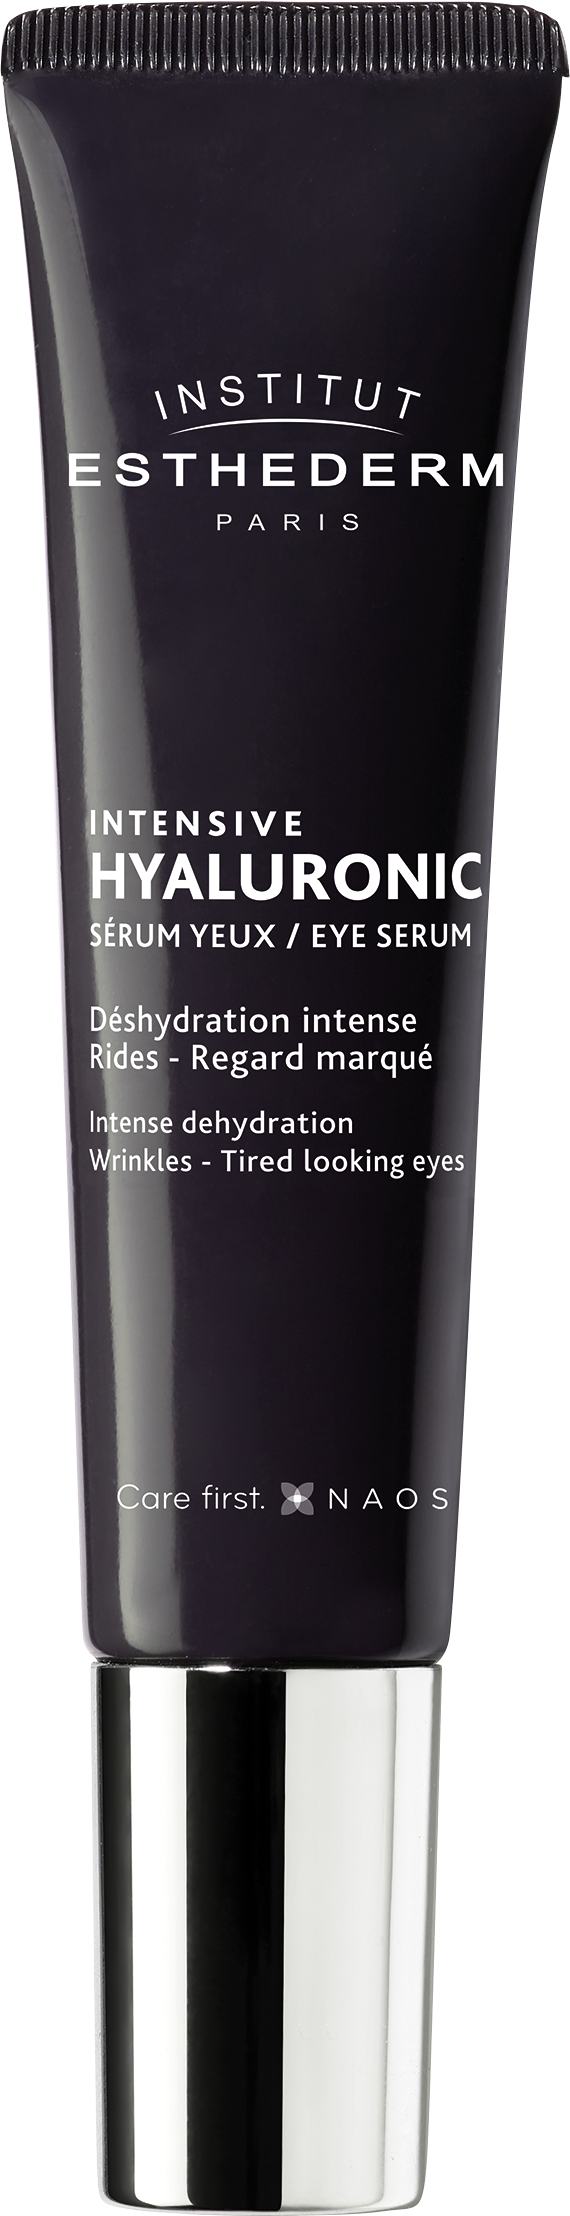 Esthederm Intensive Hyaluronic Serum Yeux 15 Ml